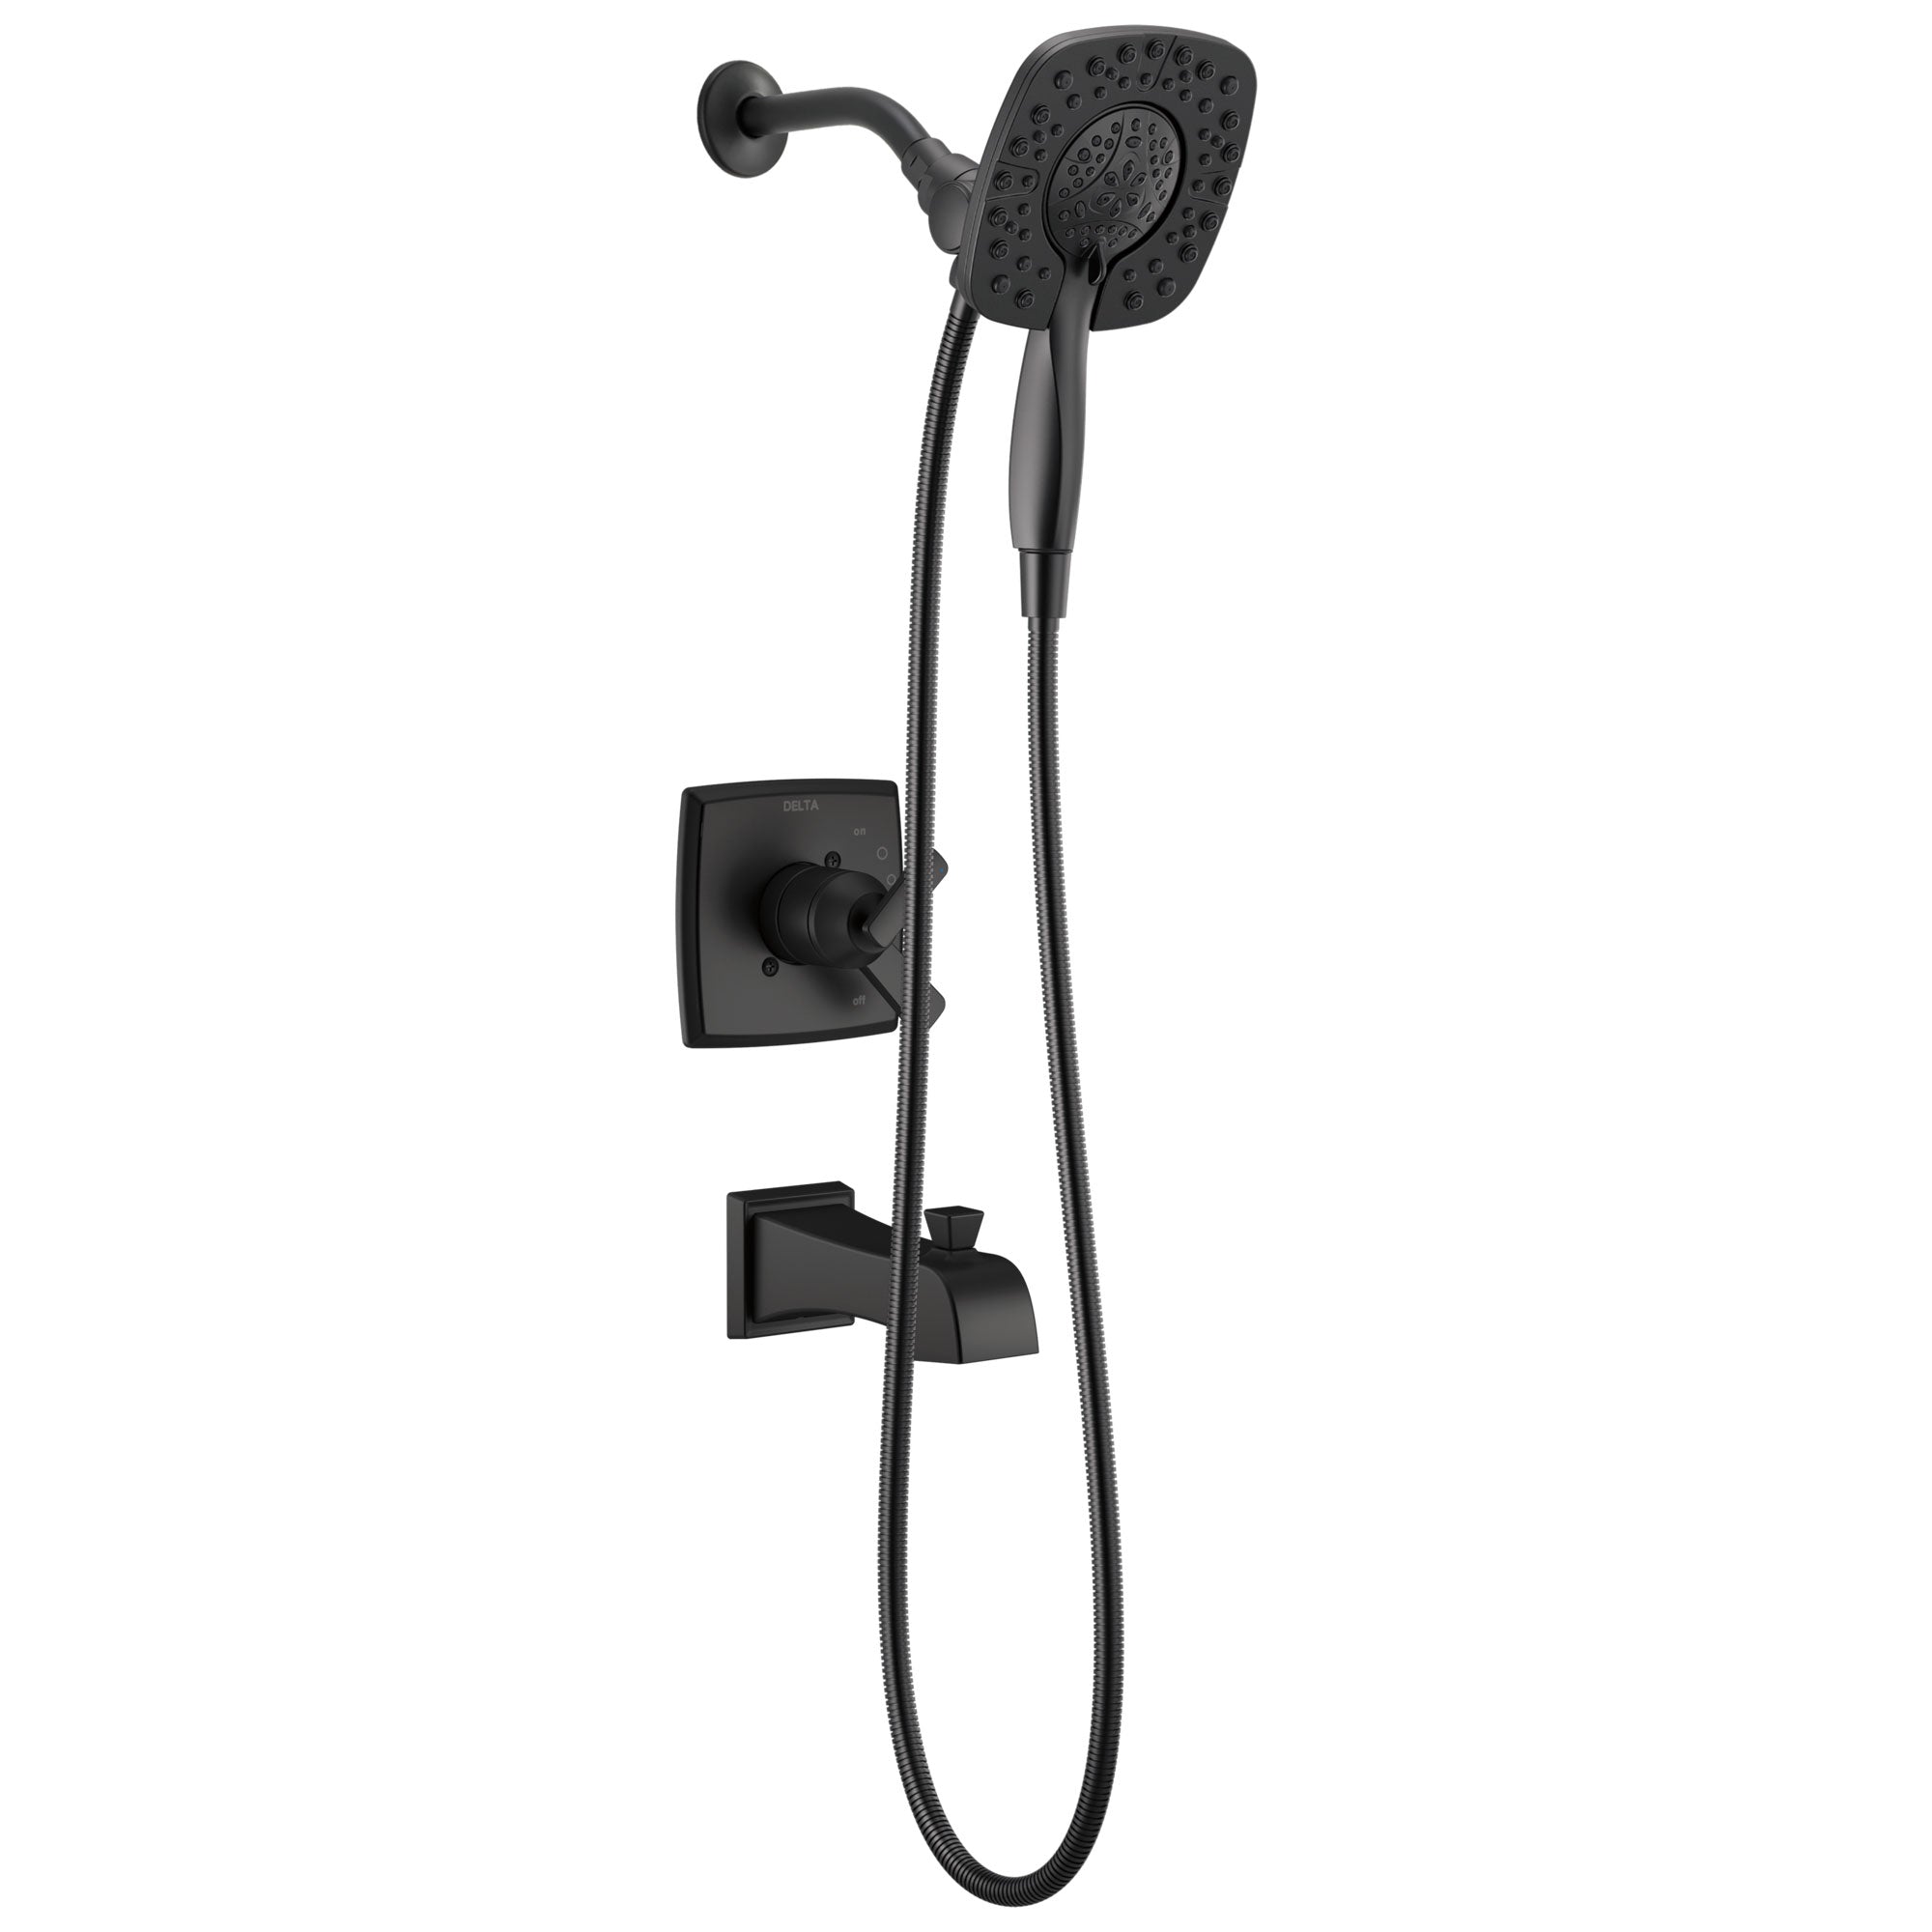 Delta Ashlyn Matte Black Finish Monitor 17 Series In2ition Showerhead/Hand Shower and Tub Spout Combo Includes Handles and Valve without Stops D3337V